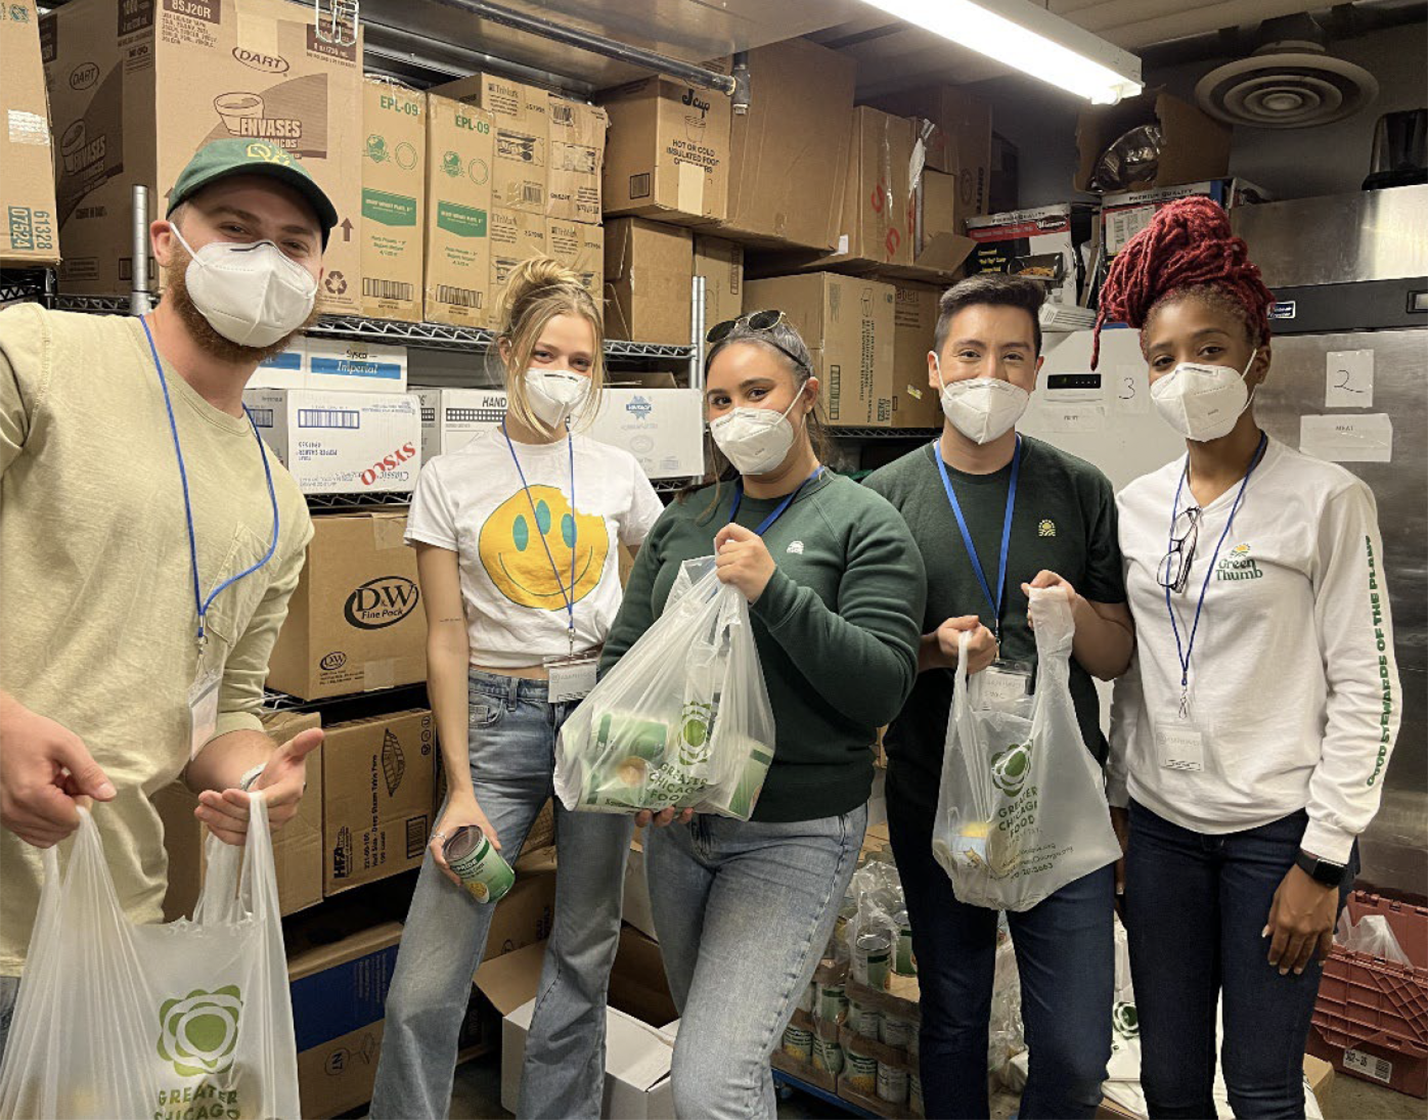 Five team members stand in a Safe Haven Foundation storage room, holding bags of donated goods.